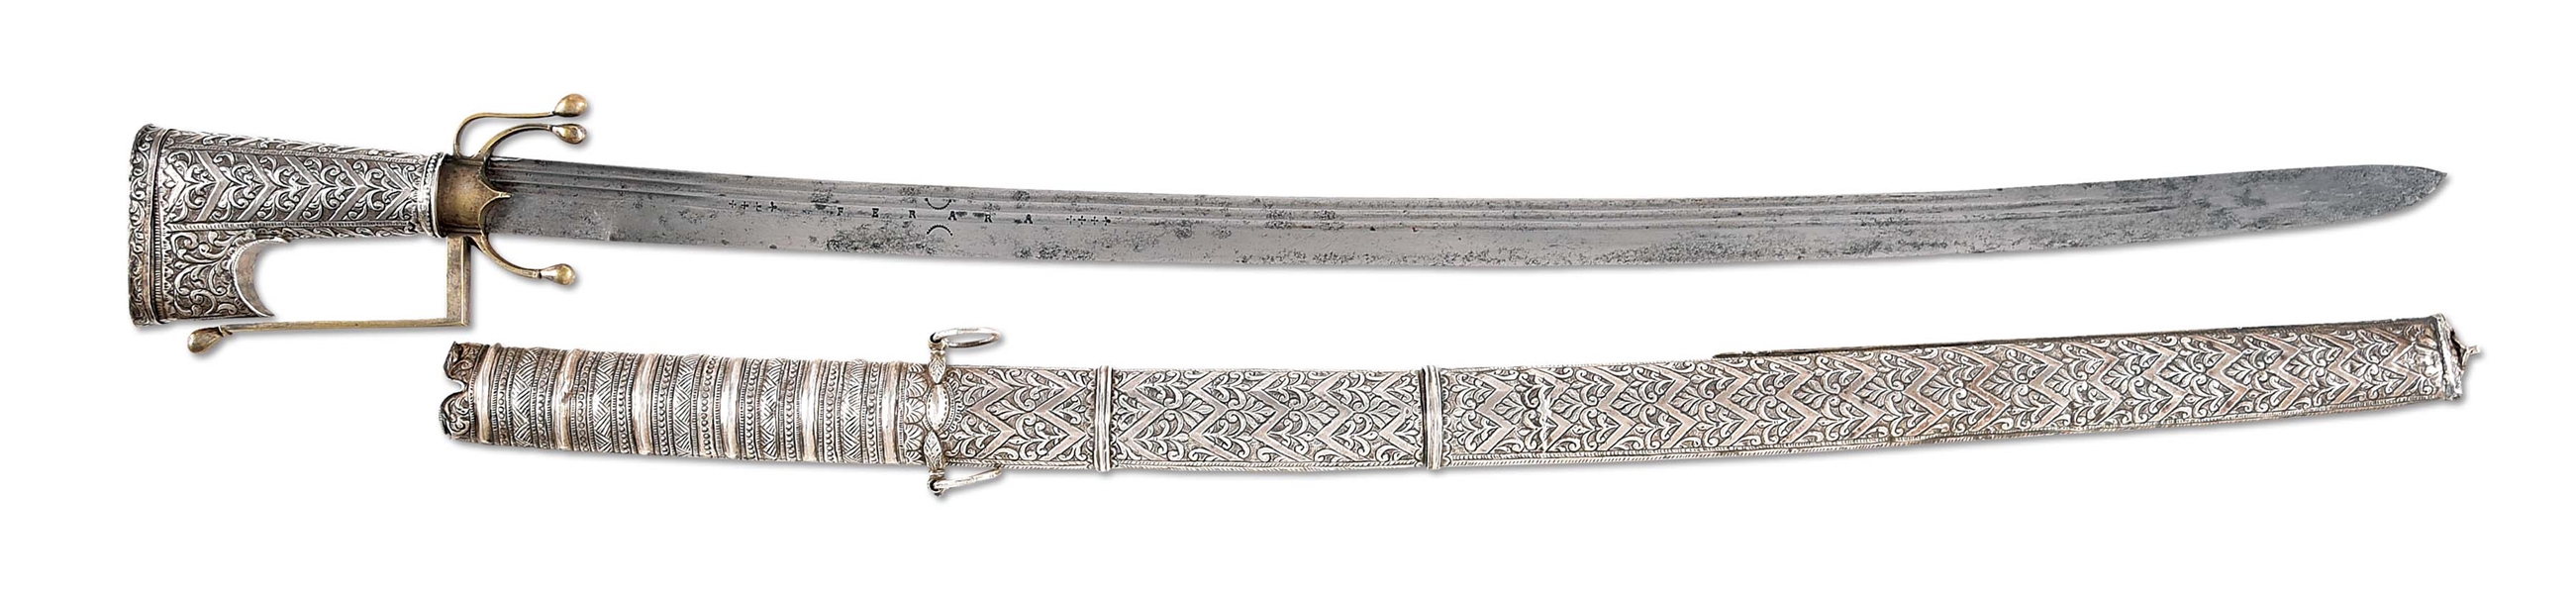 A GOOD NIMCHA WITH FERRARA BLADE AND MOUNTED IN A SHEET SILVER WRAPPED SCABBARD, LIKELY MOROCCAN.